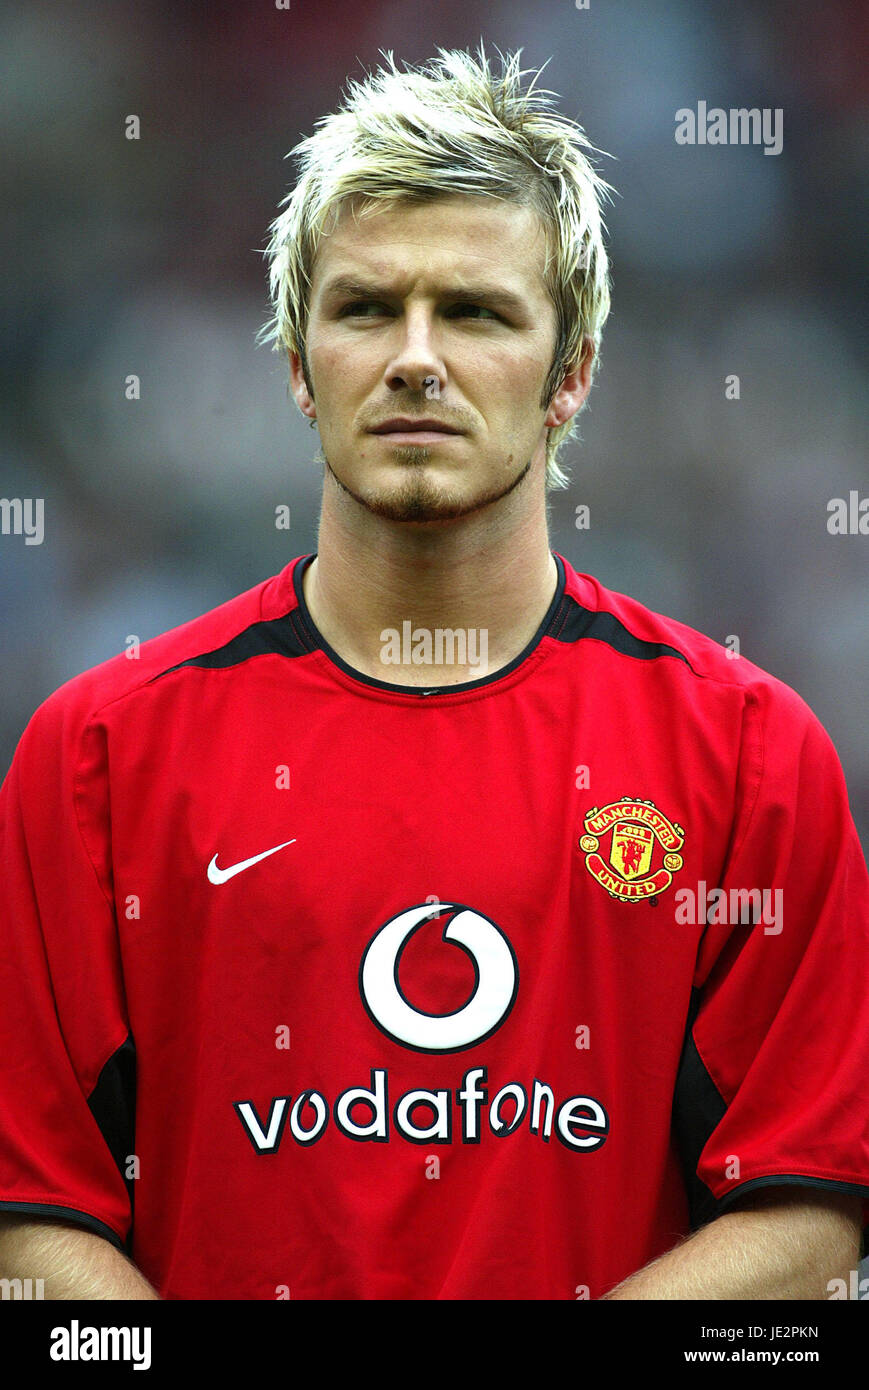 DAVID BECKHAM MANCHESTER UNITED FC OLD TRAFFORD MANCHESTER ENGLAND 10 August 2002 Stock Photo